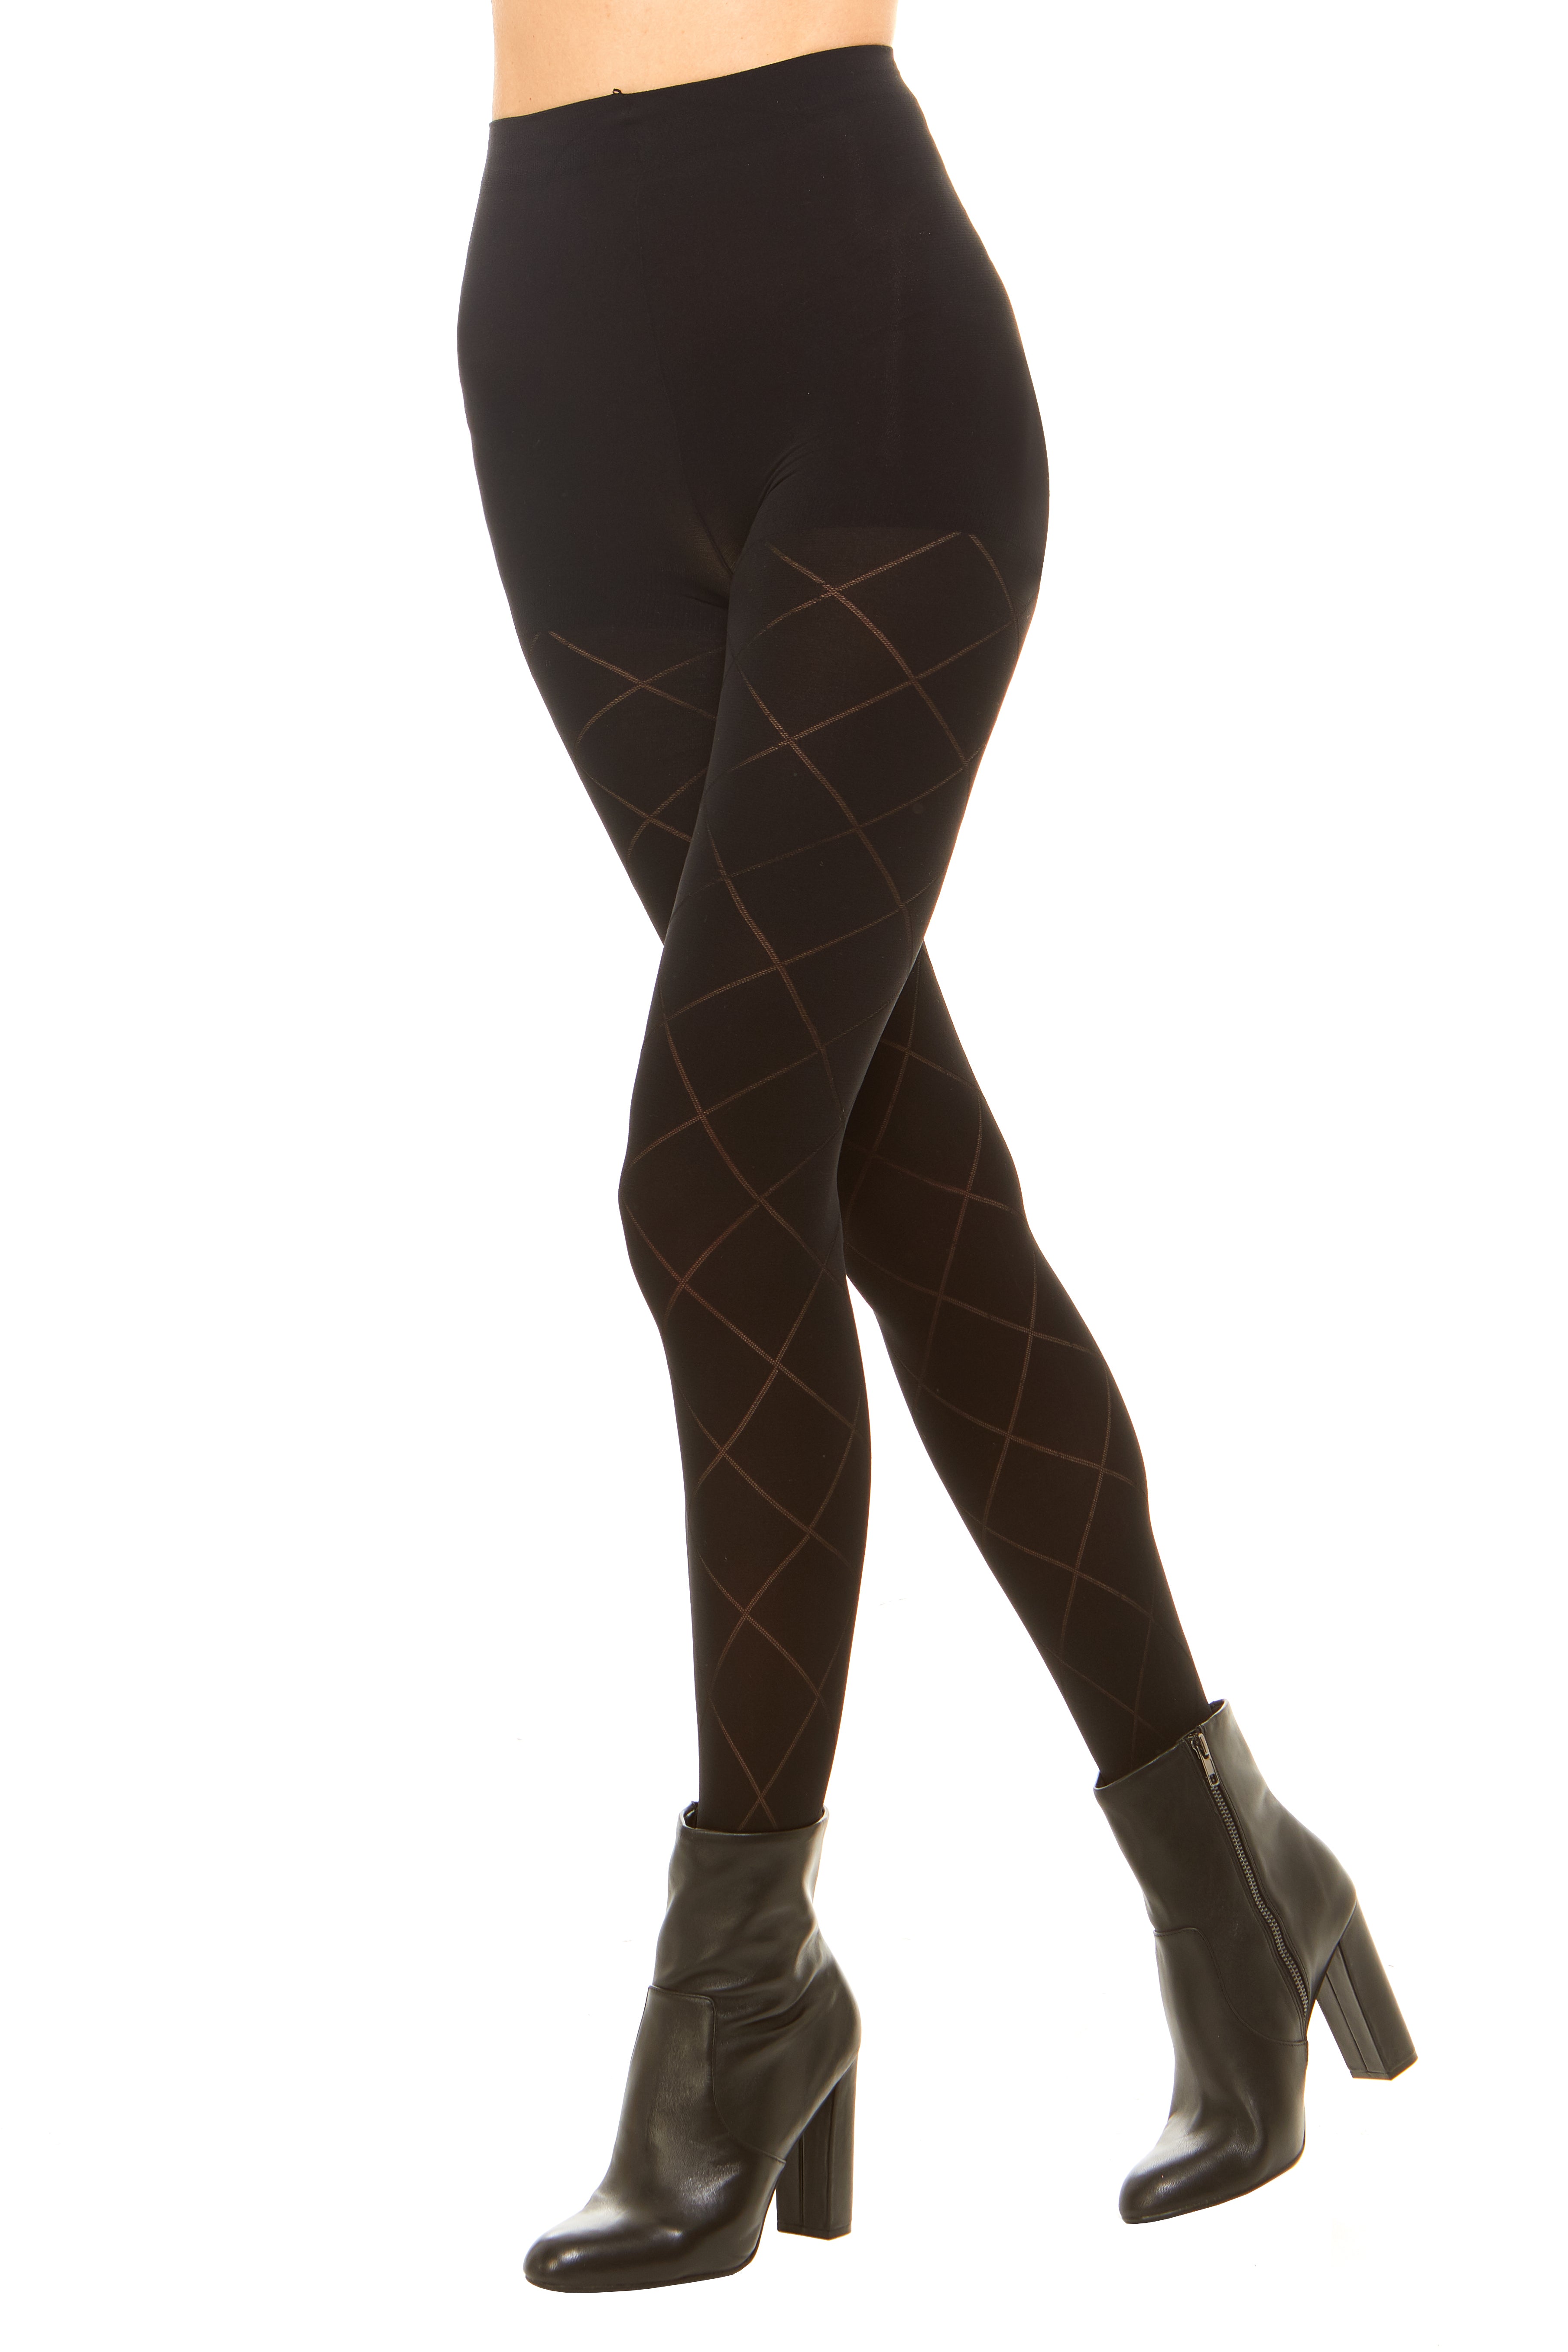 Buy Black Diamond Pattern Tights 1 Pack from the Next UK online shop